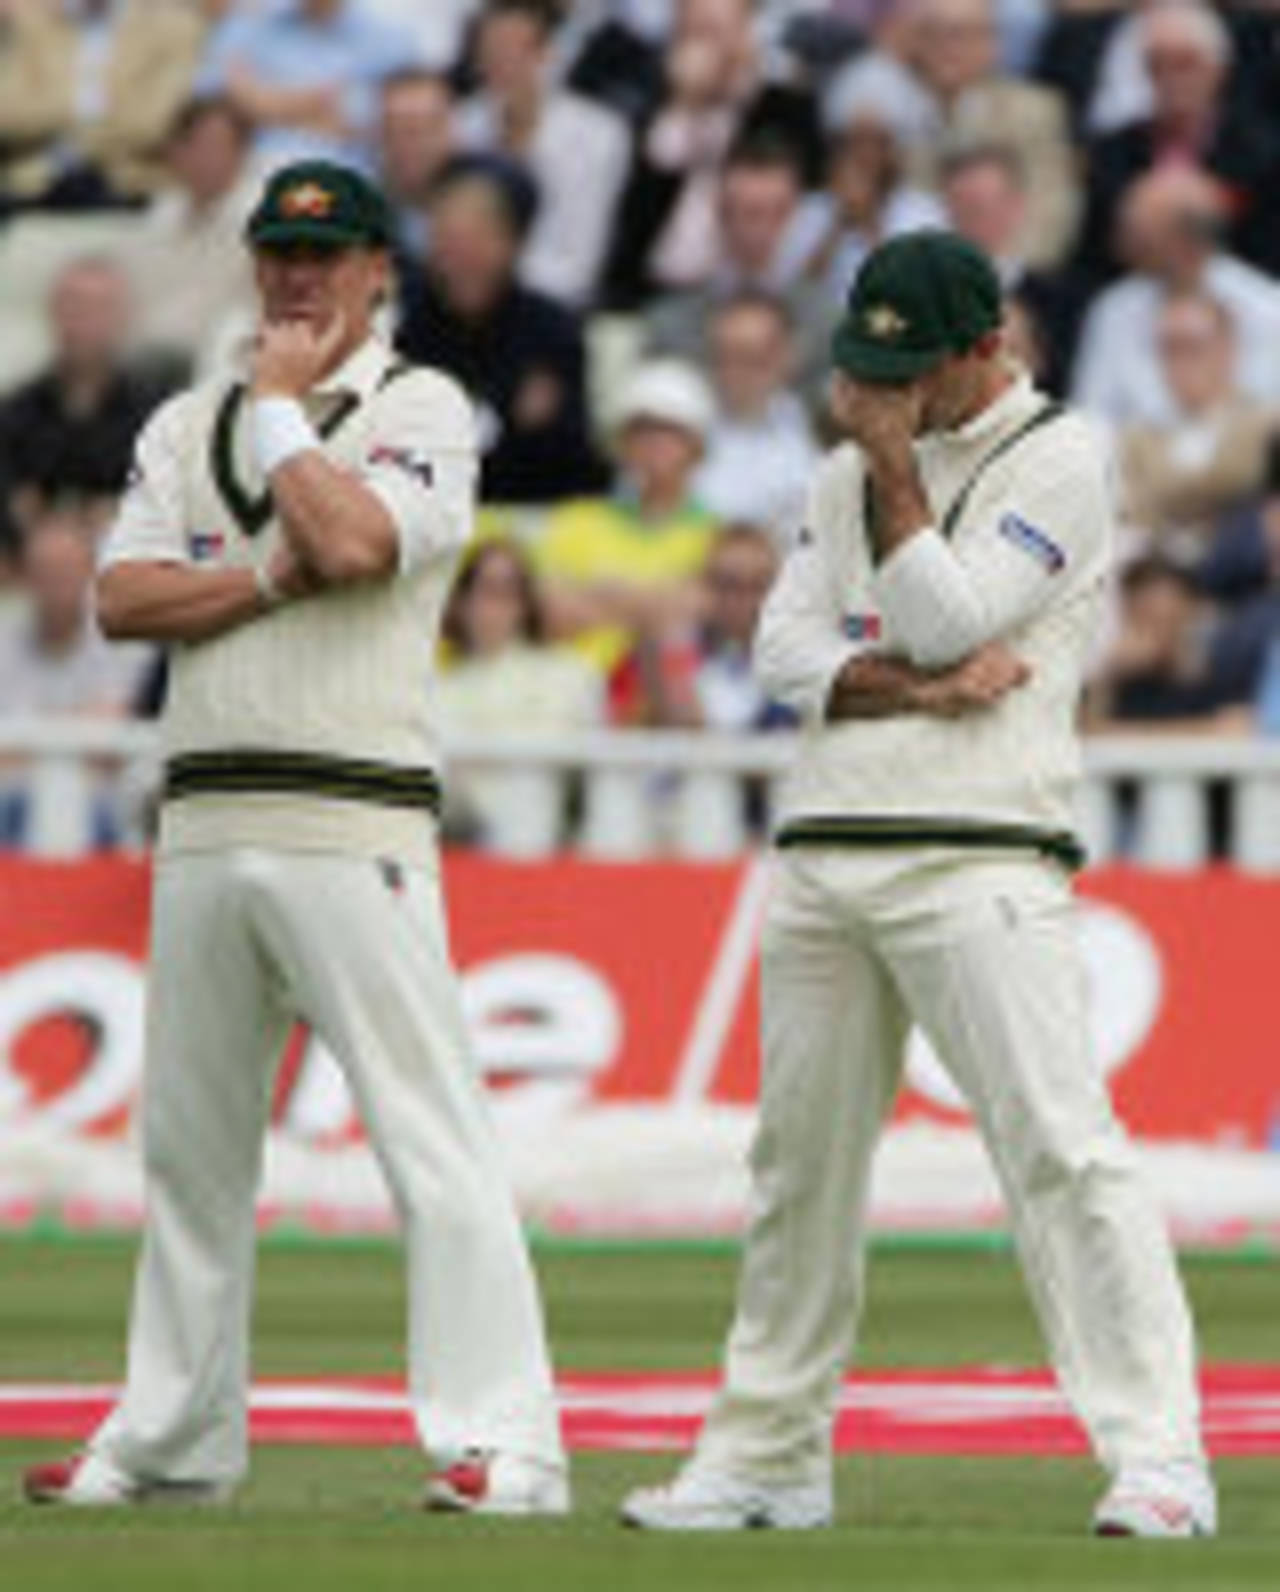 Shane Warne and Ricky Ponting contemplate a long morning in the field, England v Australia, 2nd Test, Edgbaston, August 4, 2005